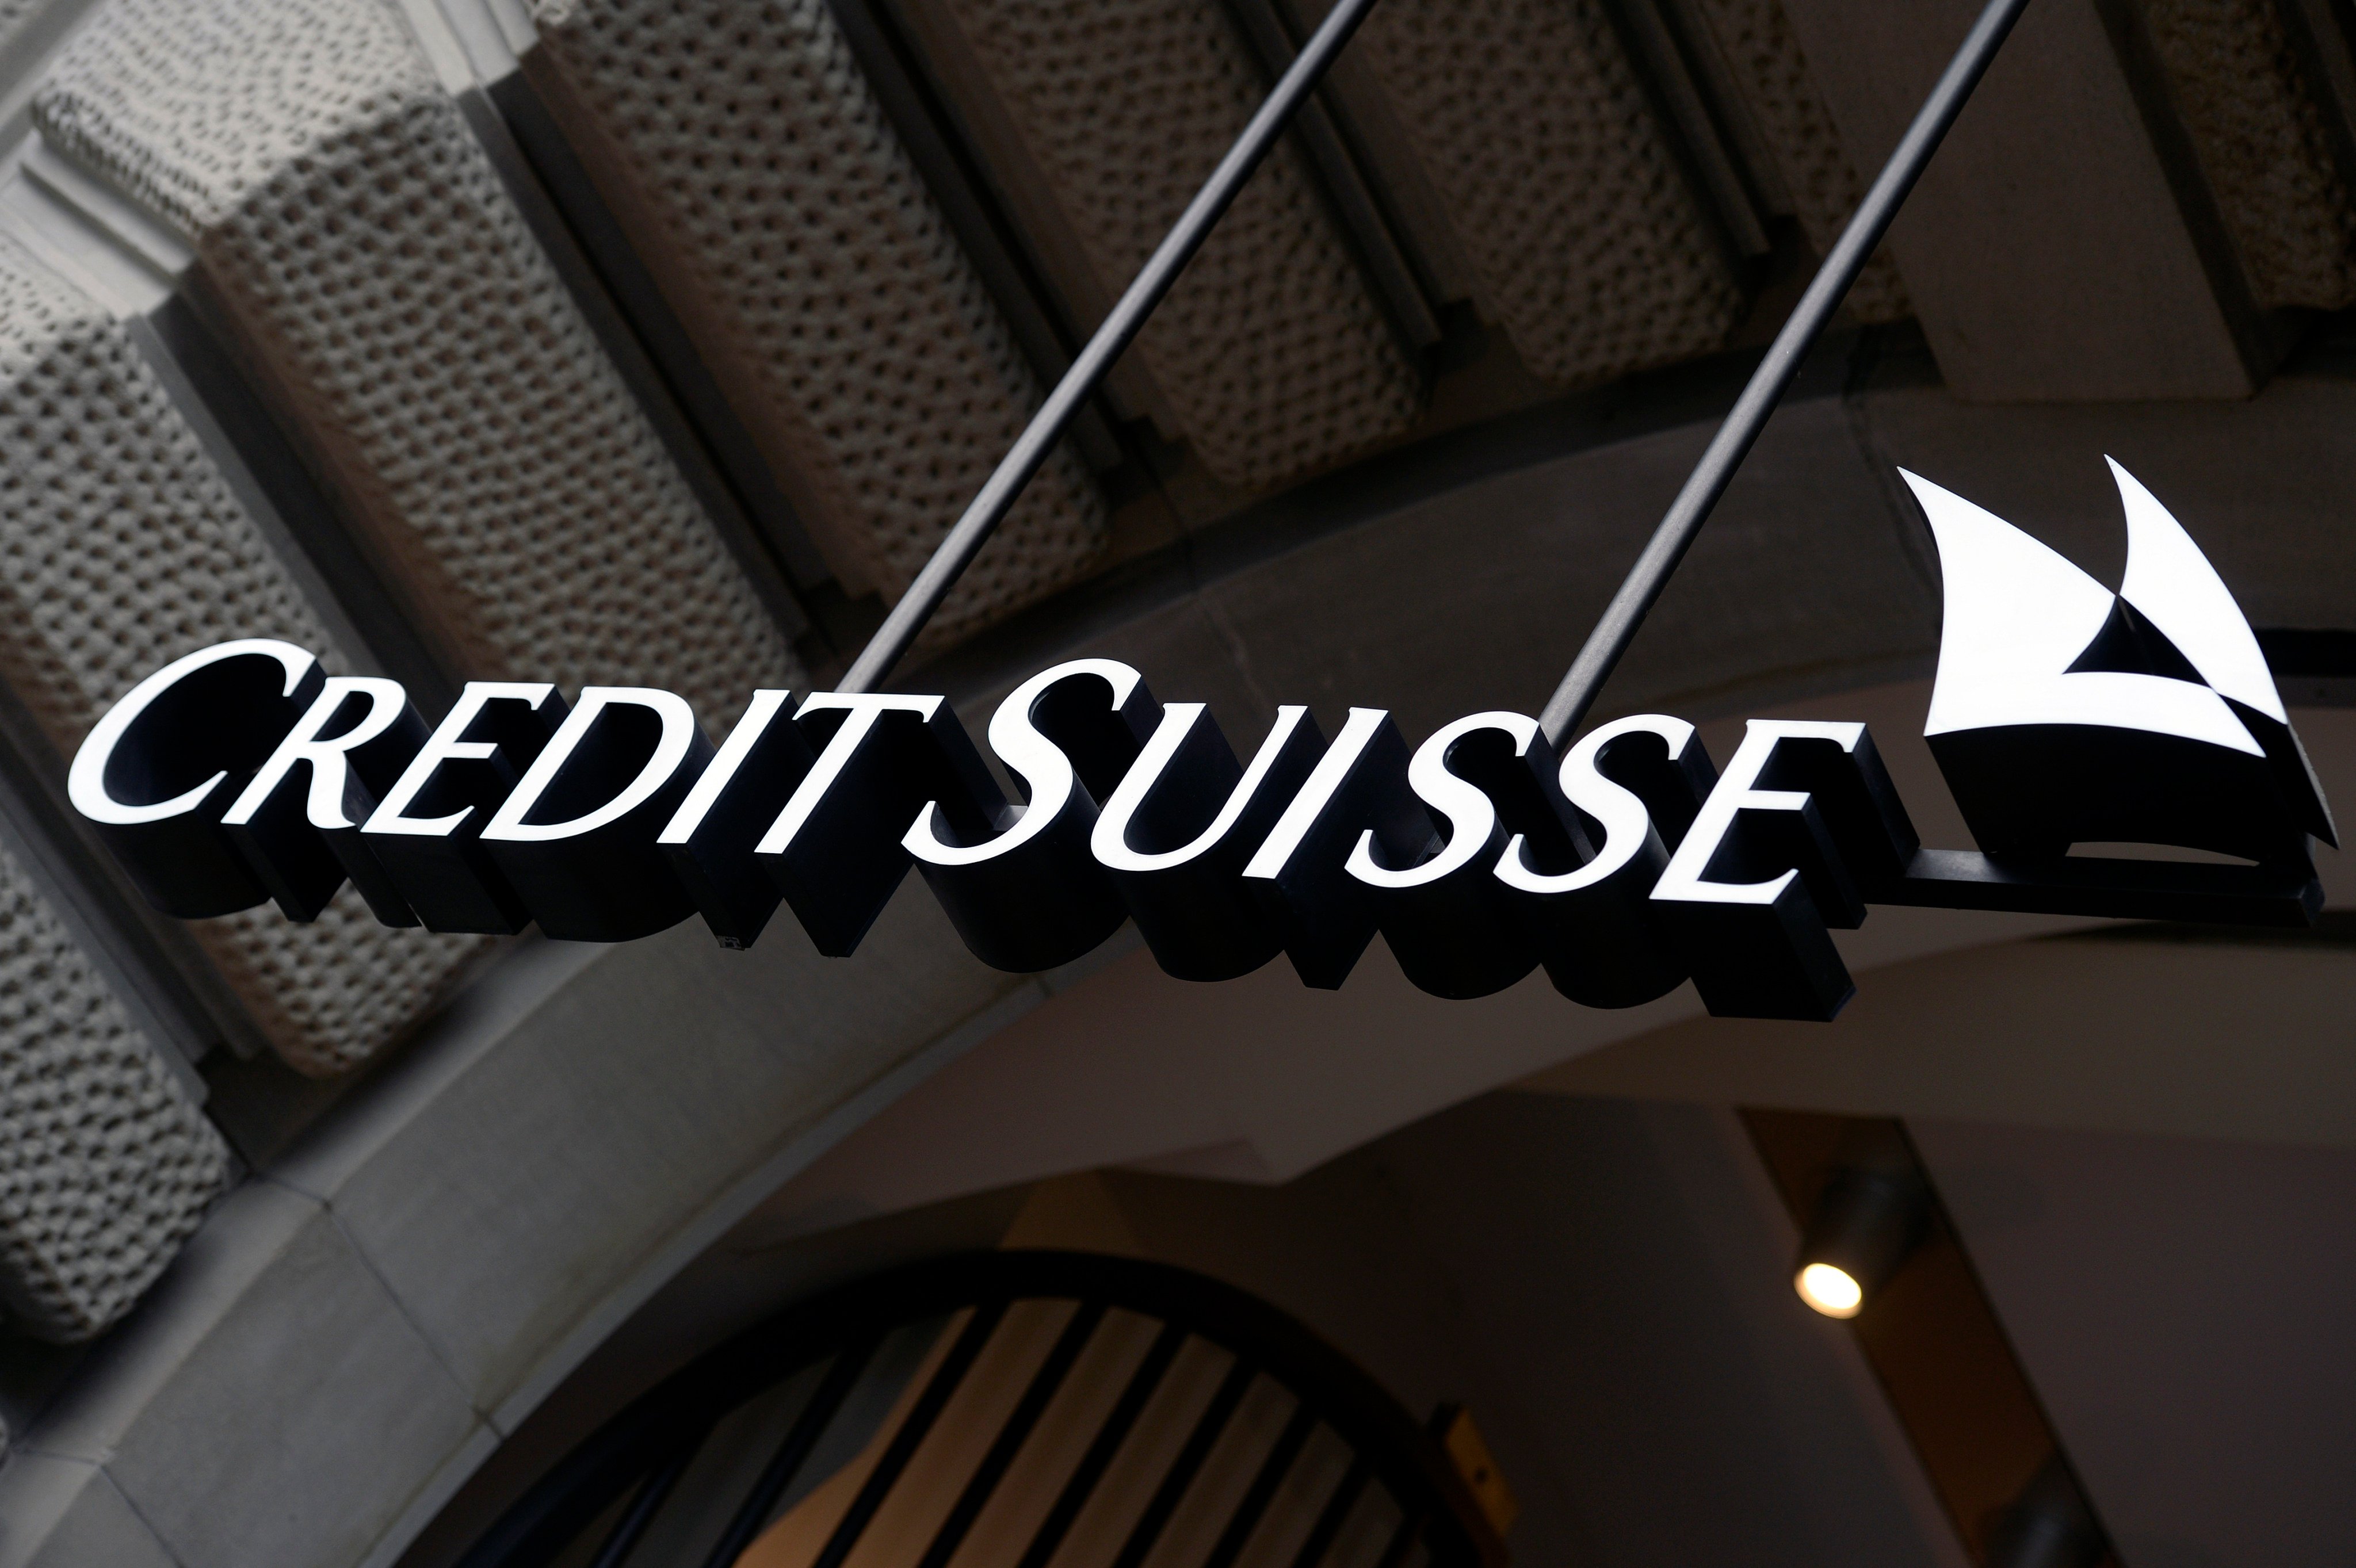 Former Georgian Prime Minister Bidzina Ivanishvili has sued Credit Suisse bank for failing to protect his money in a trust pilfered by a manager. Photo: AP